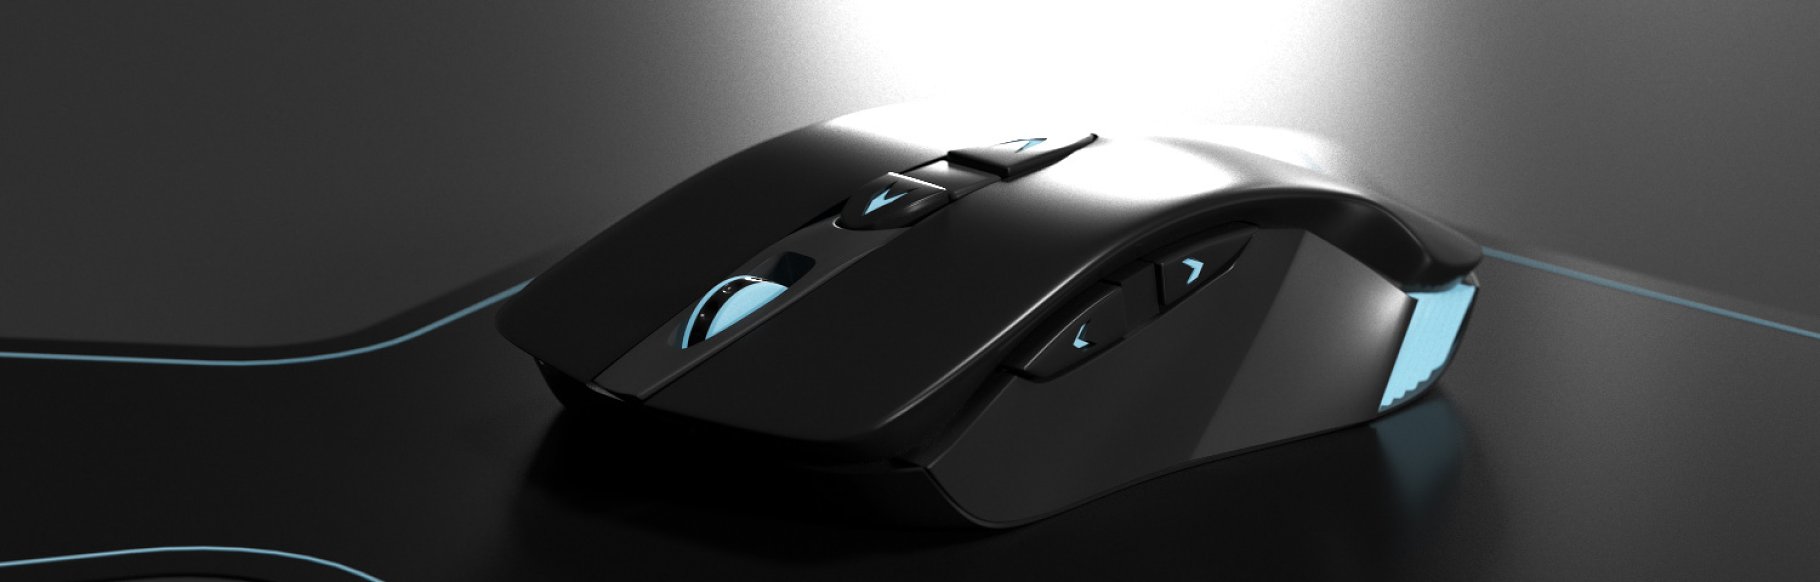 Rendering an elegant 3d model of a gaming mouse